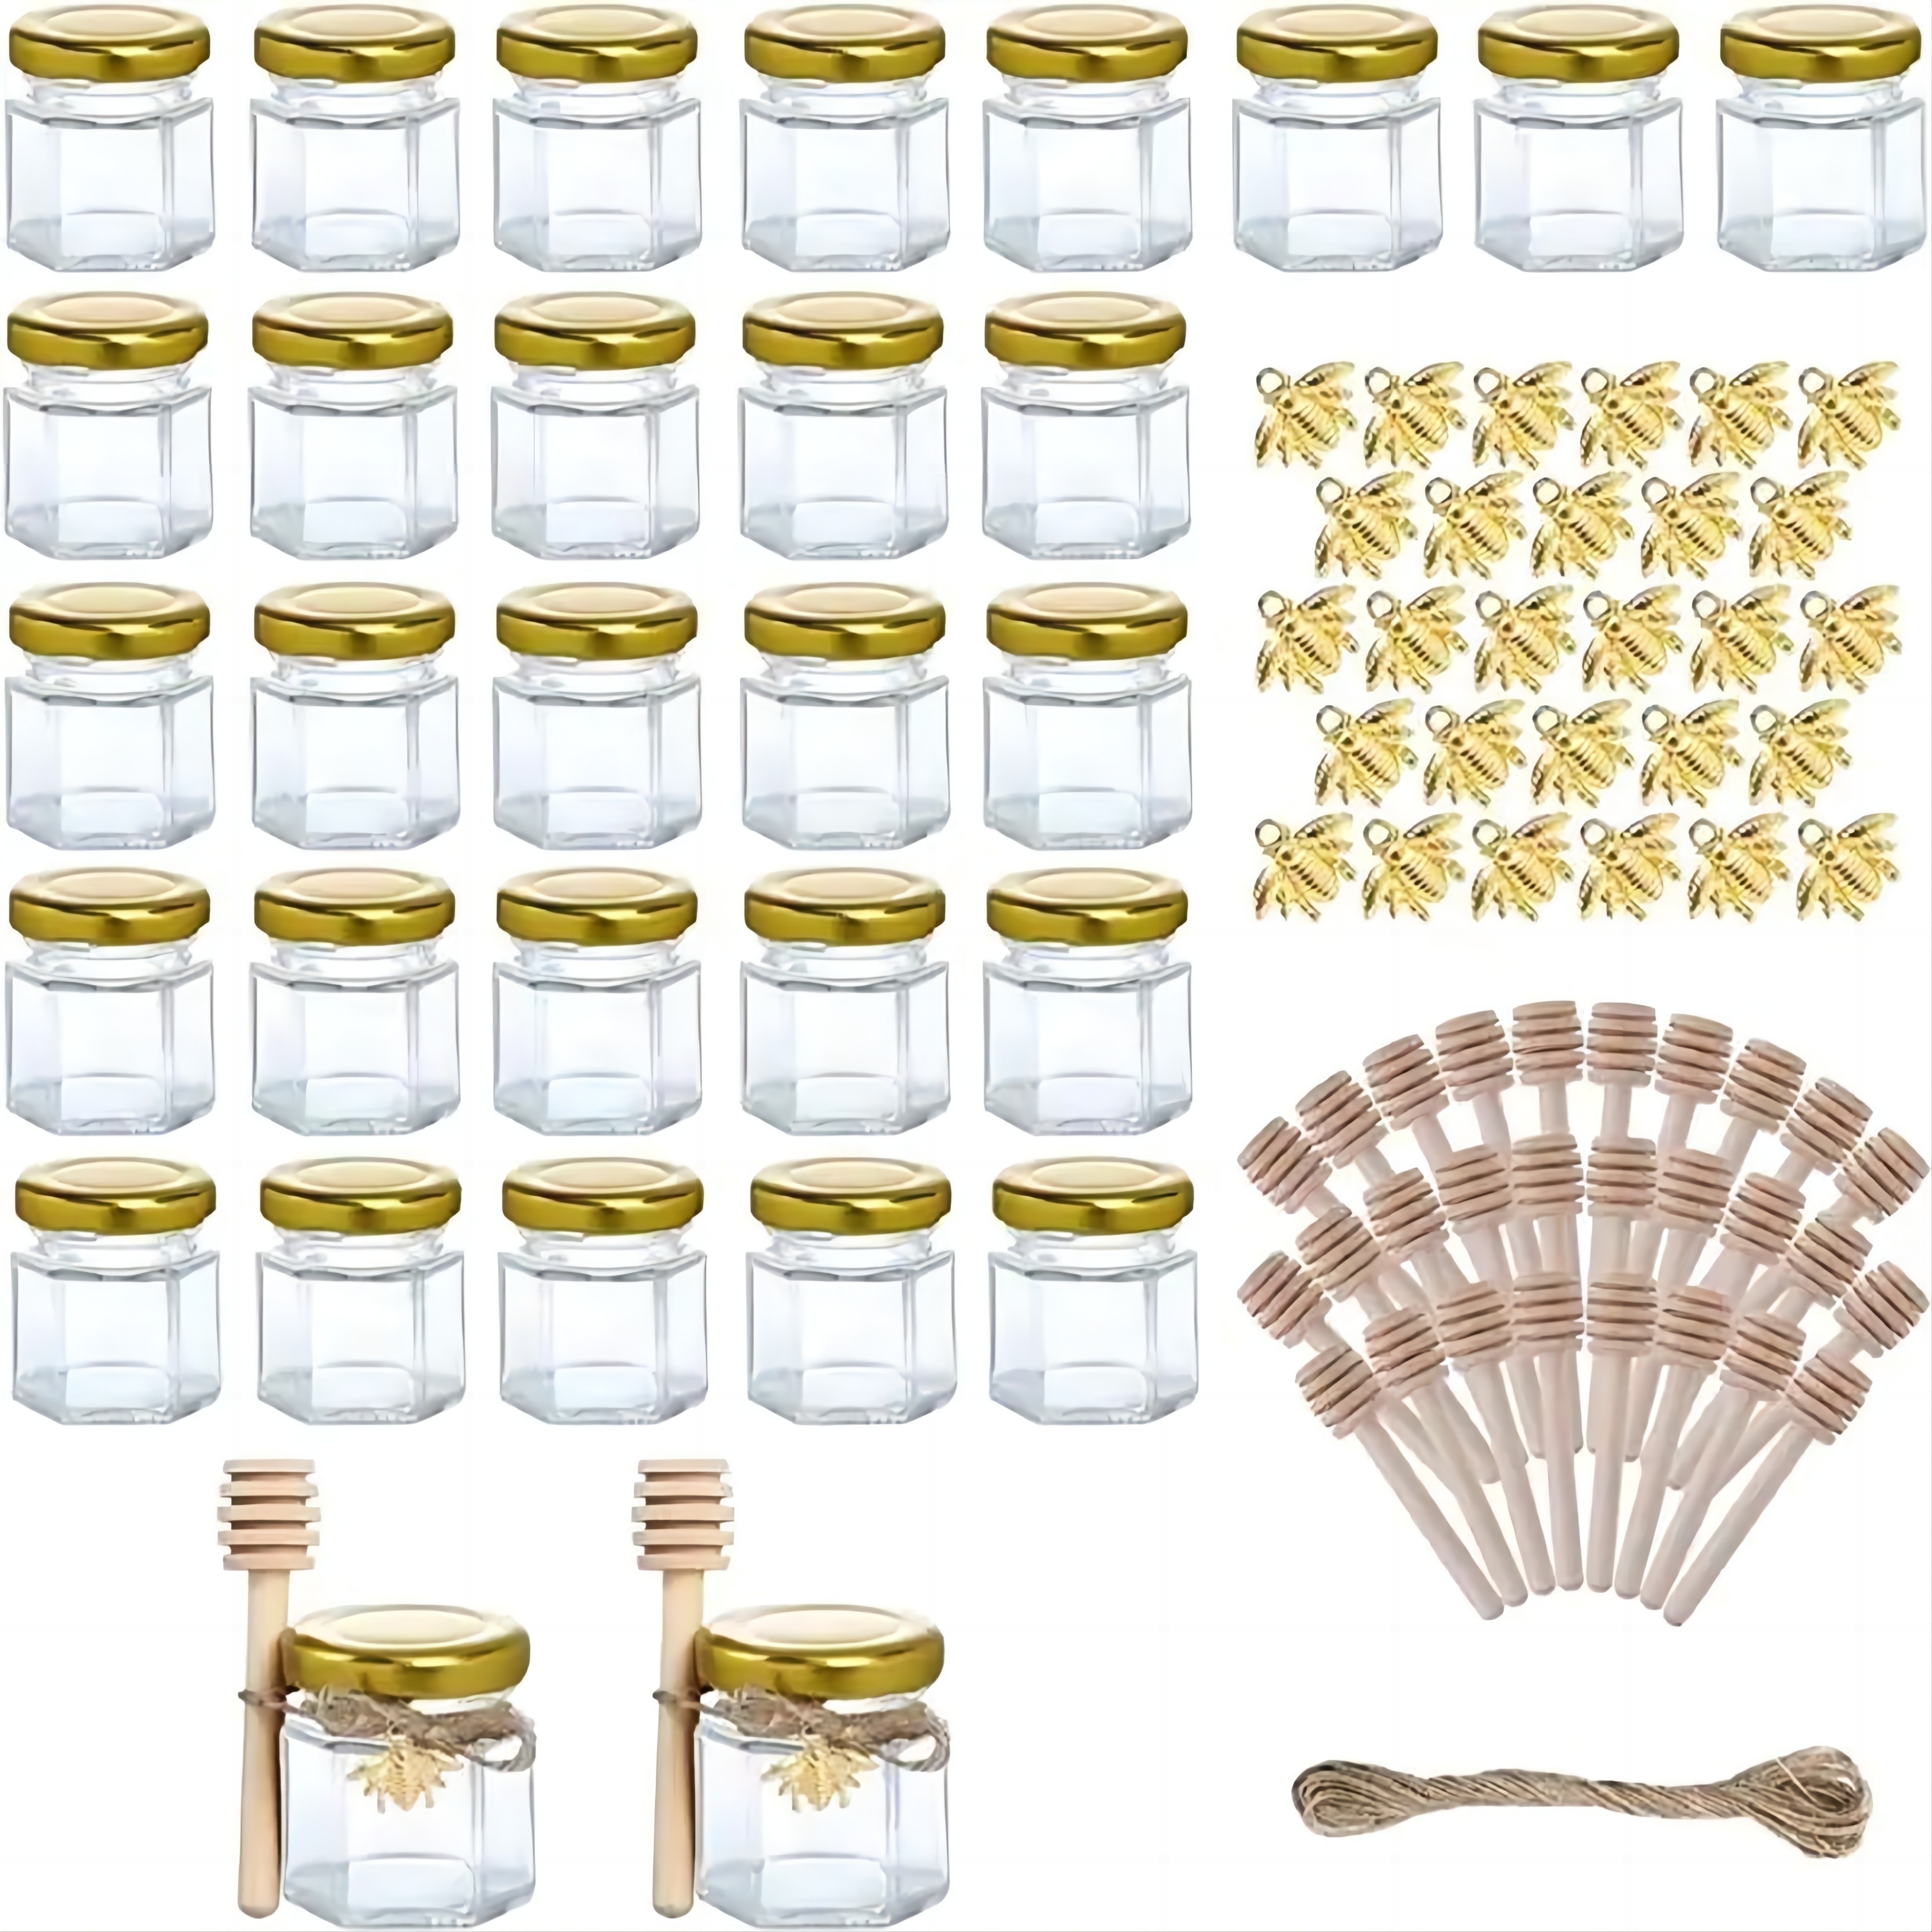 

30/50pcs Mini Hexagon Glass Jars With Wood Dipper And Bee, 1.5oz/ 45ml Small Honey Jams Jars Bottles With Golden Lids, Kitchen Storage Items, Honey Accessories